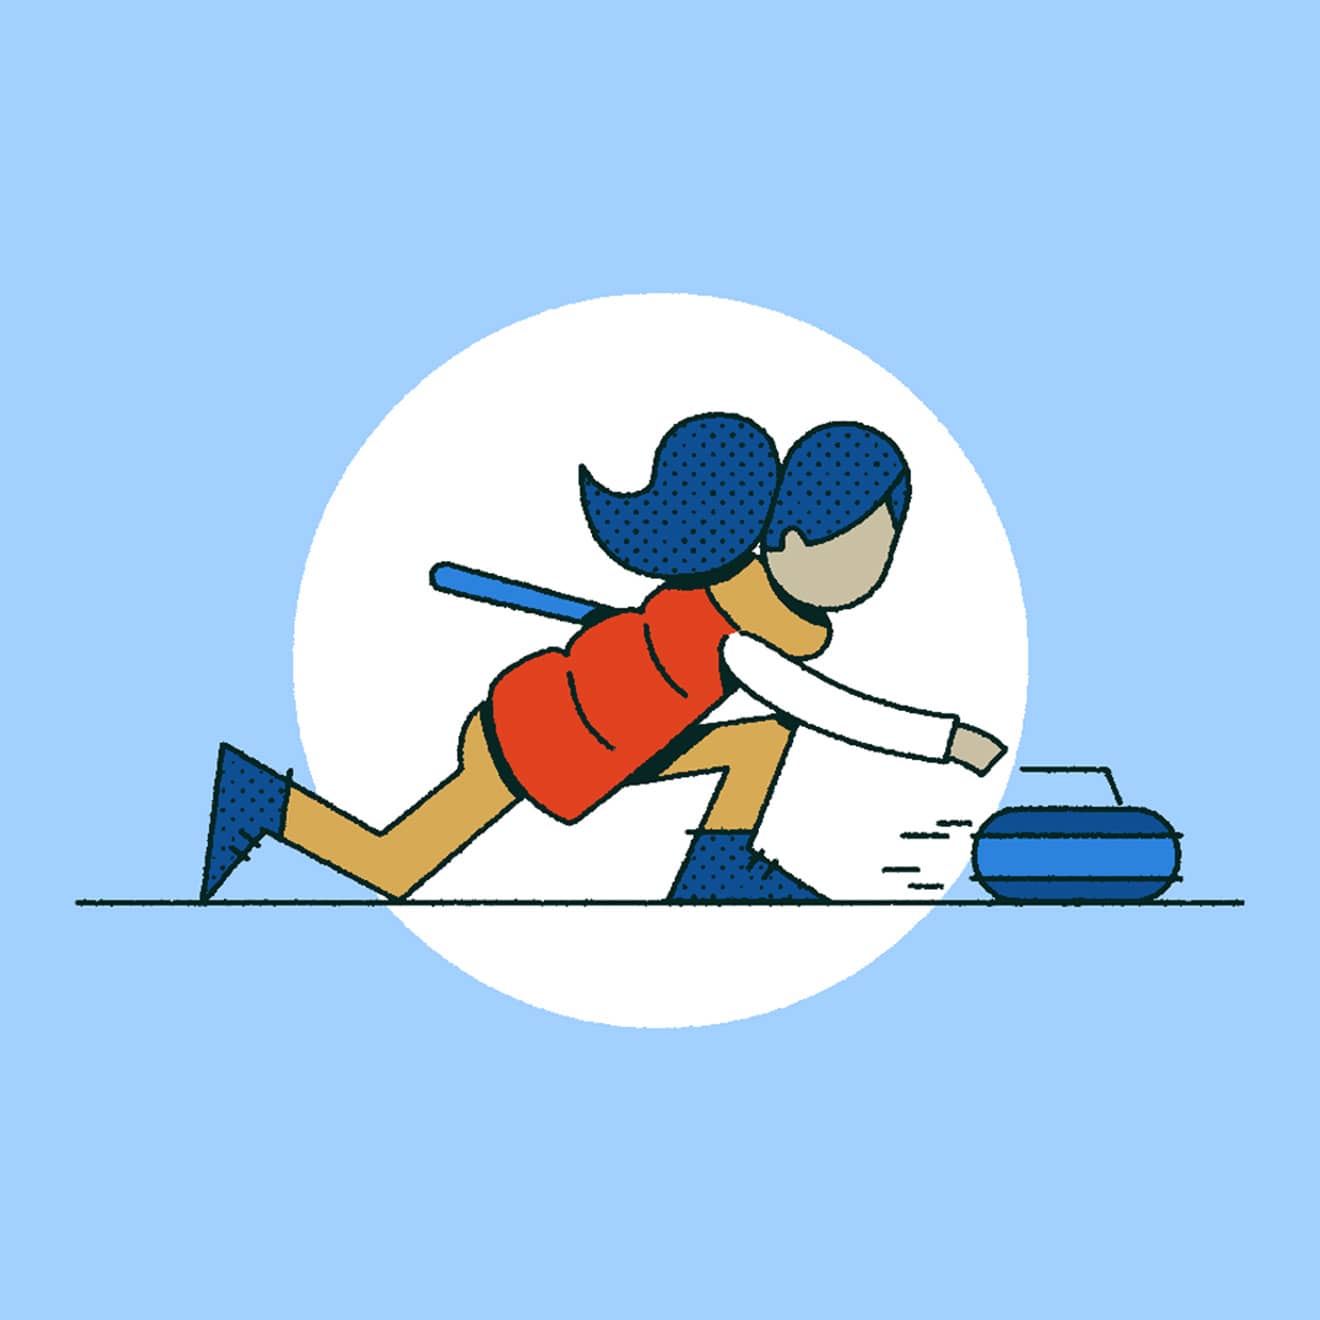 Blue, Red, White & Beige illustration of a woman curling